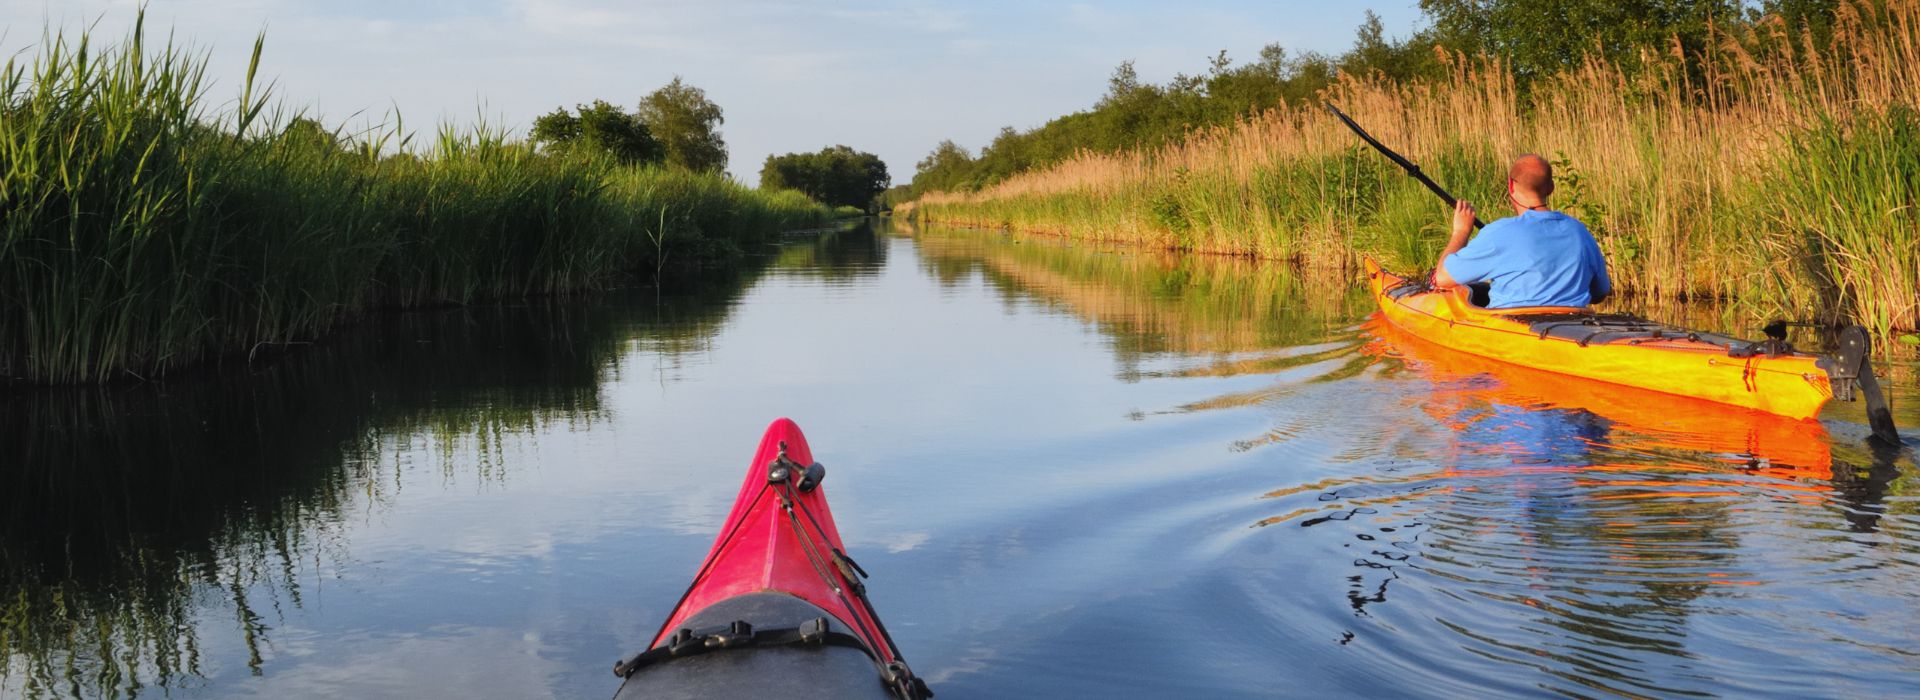 two people kayaking on a river lined with marsh plants